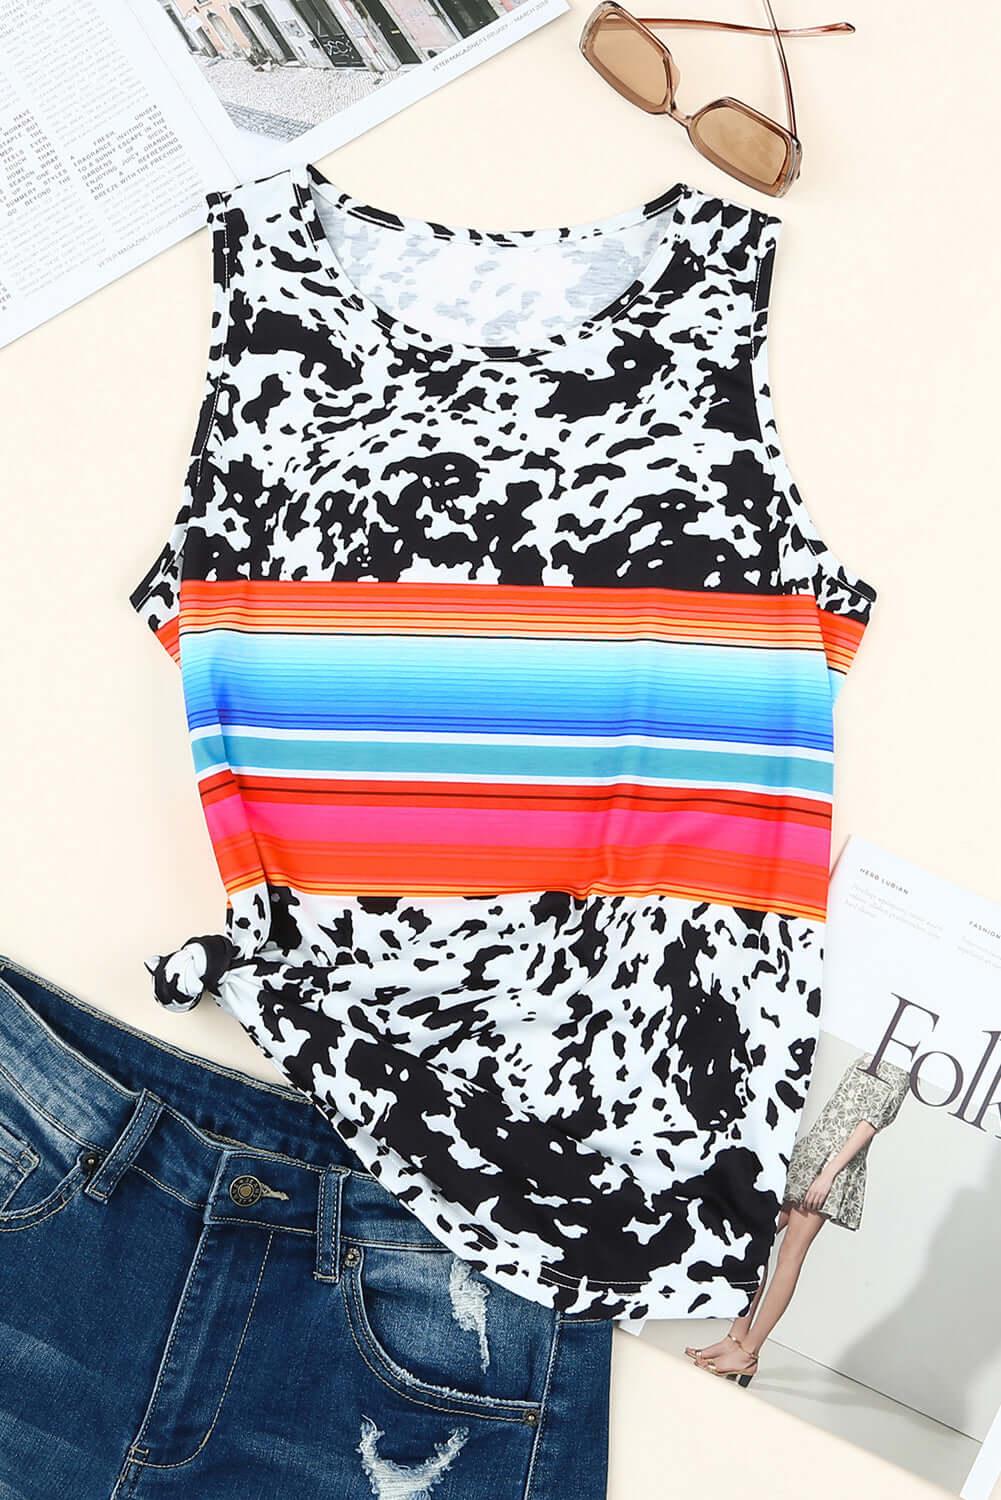 Multicolored Round Neck Tank Top -Women's Fashion - Women's Clothing -Tank Tops & Cami#Firefly Lane Boutique1